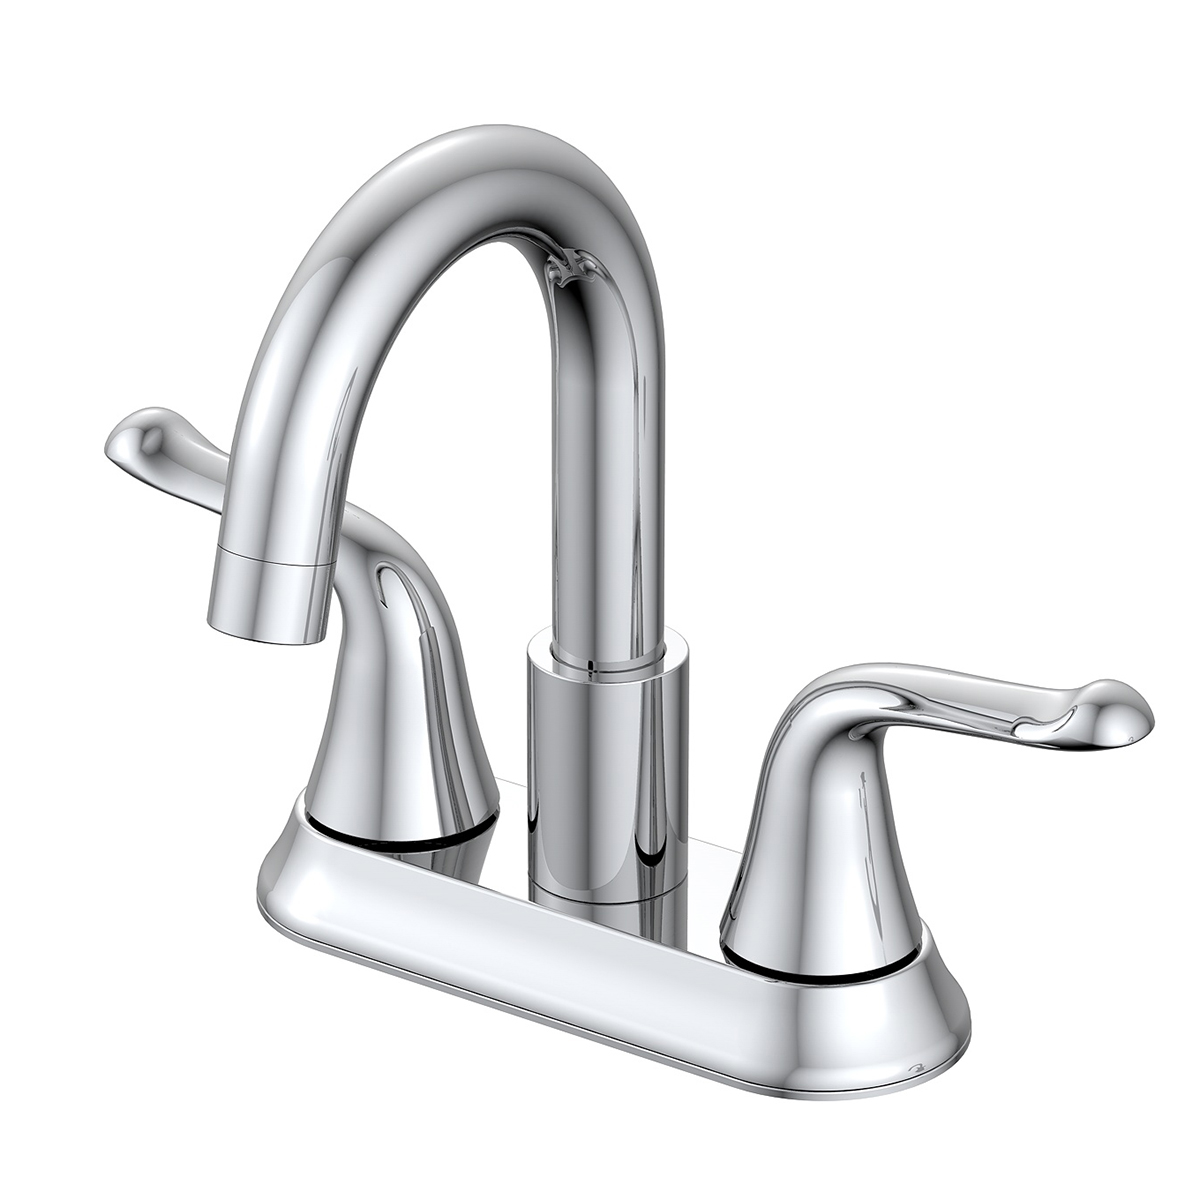 Low Cost Stainless Steel Faucet Centerset Bathroom Faucet